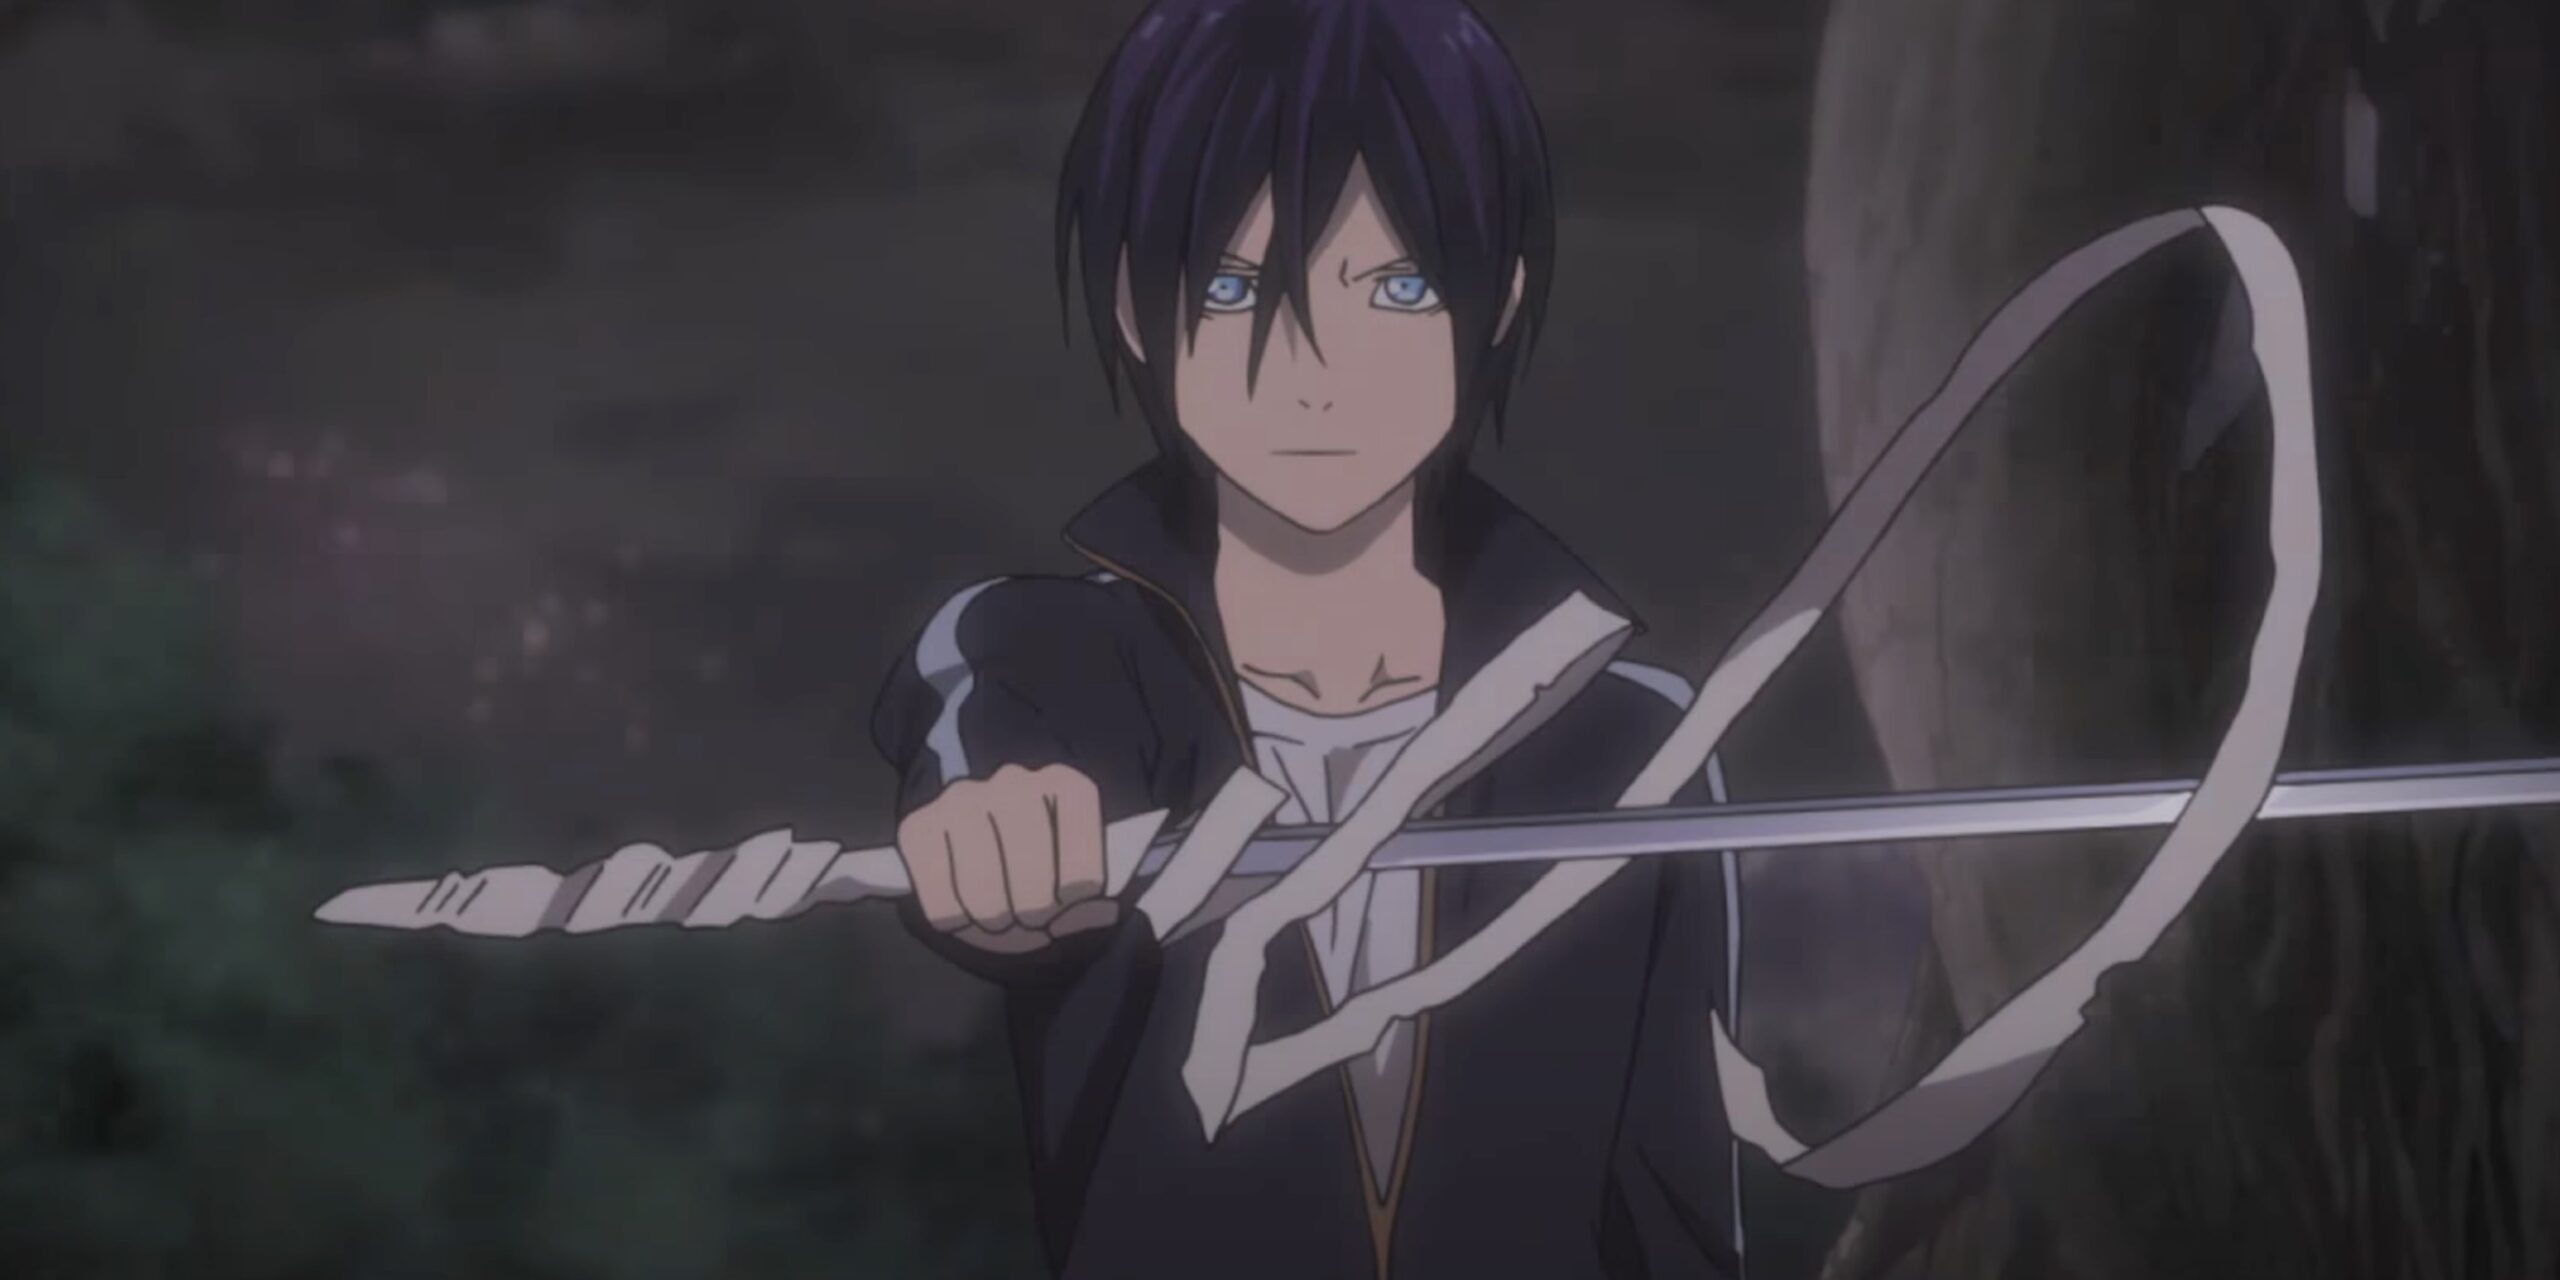 Noragami Manga Ends After 14 Years